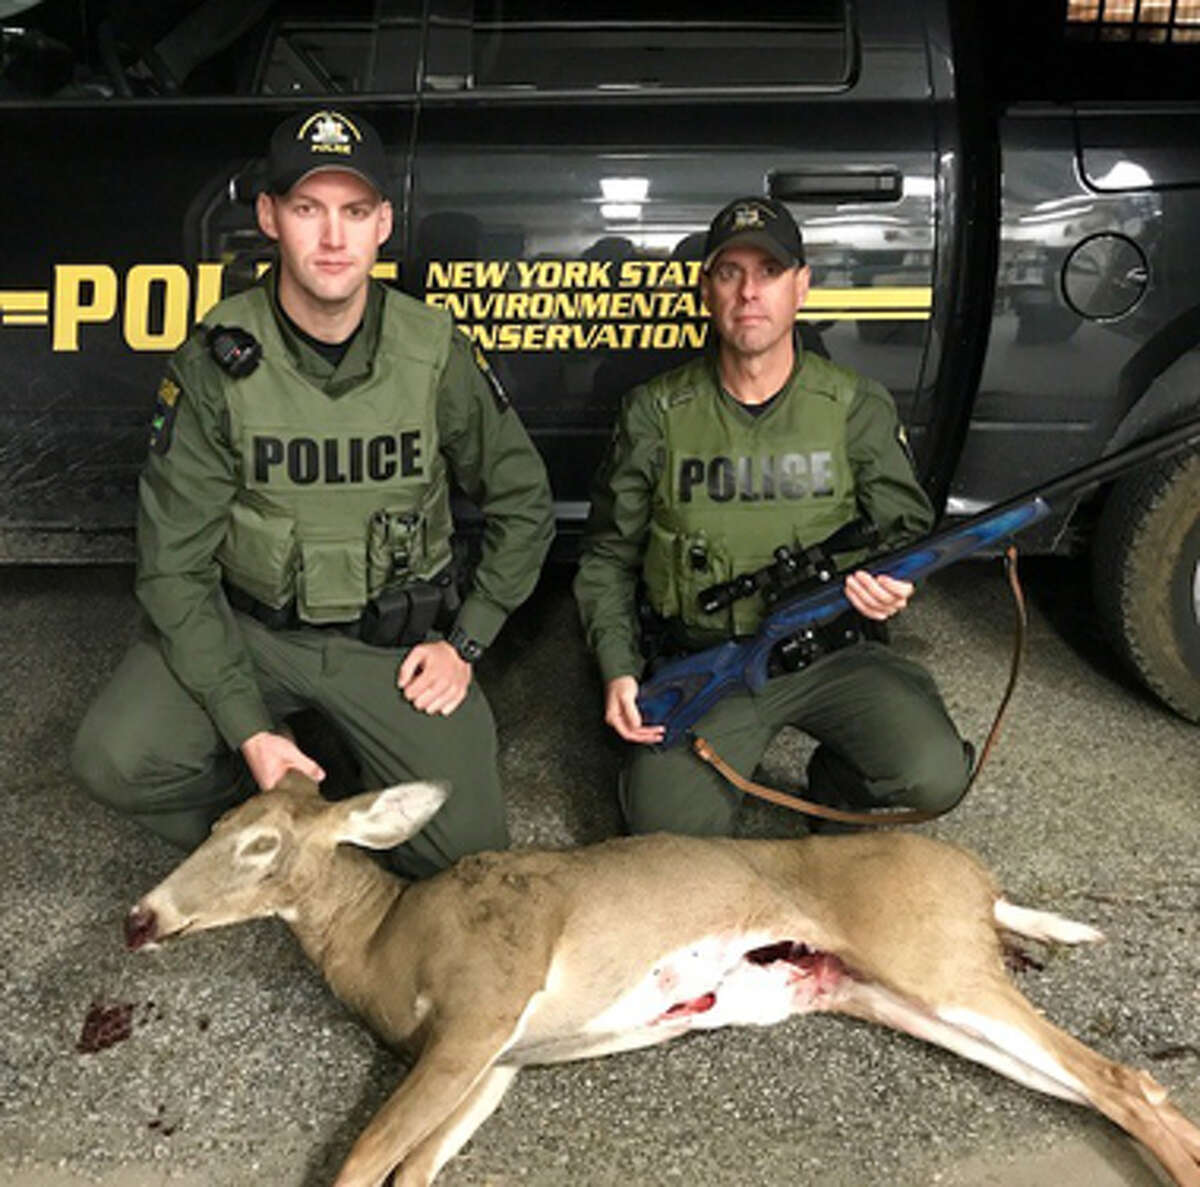 State Environmental Conservation Officers Steve Shaw and Ryan Kelley pose with an illegally taken deer and a seized rifle in Moreau, N.Y., on Oct. 17, 2017.